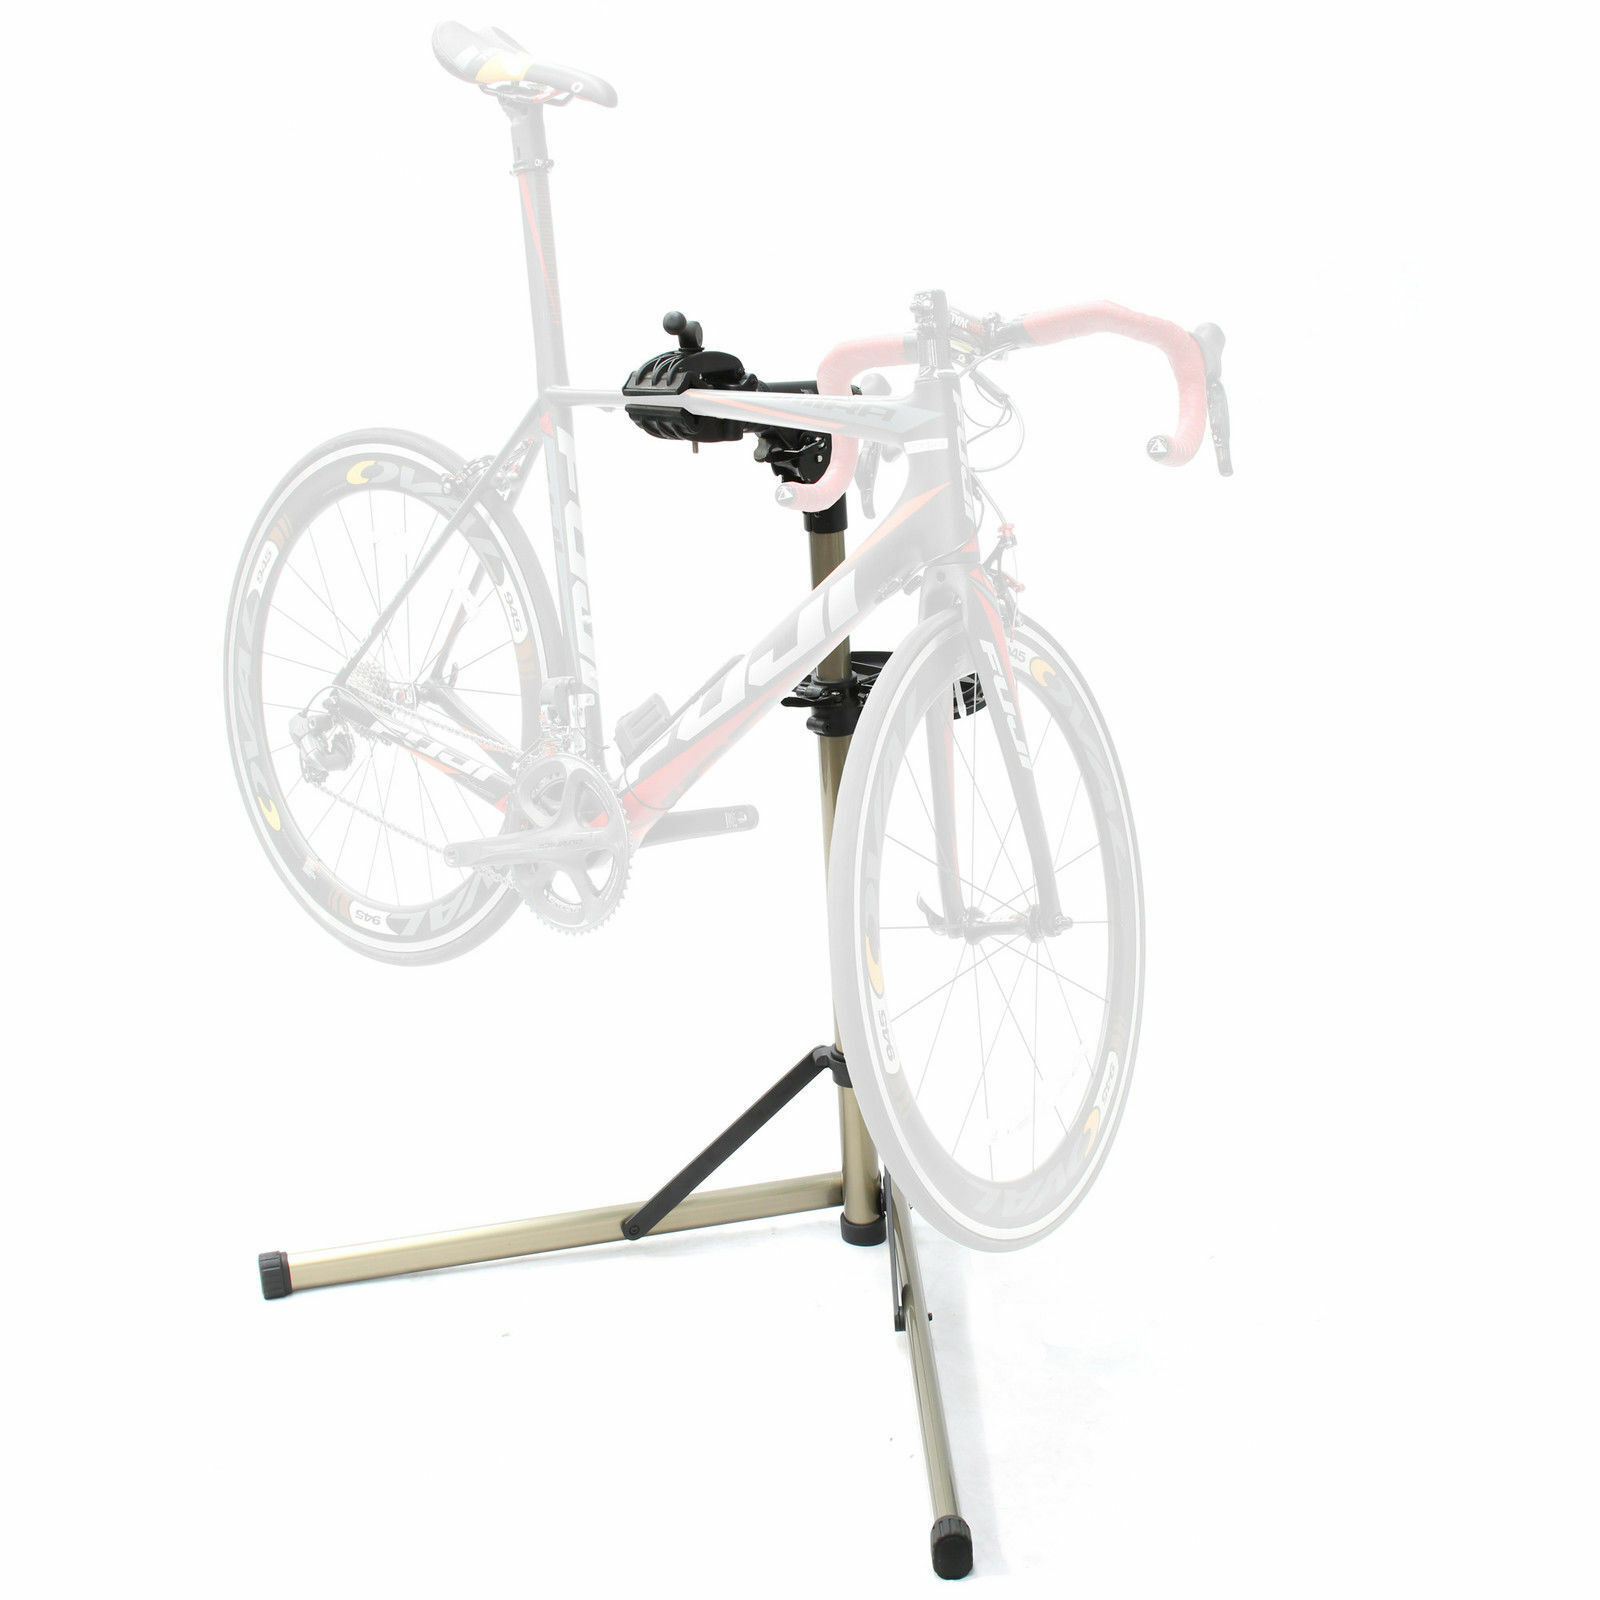 BIKE HAND YC-100BH Bicycle Repair Stand for sale online 